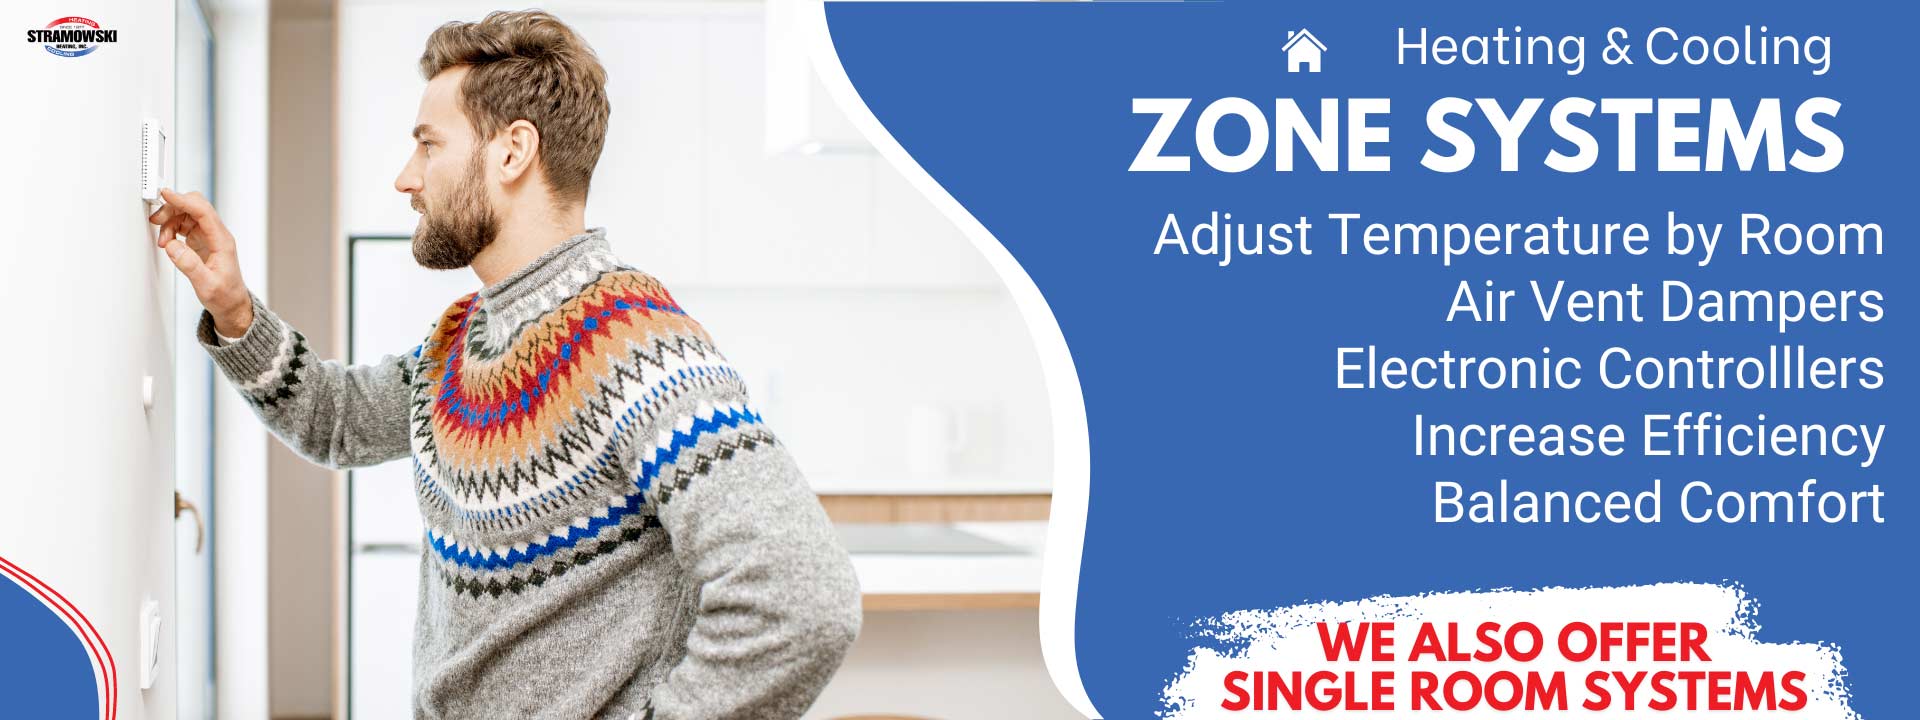 Zone Heating Systems